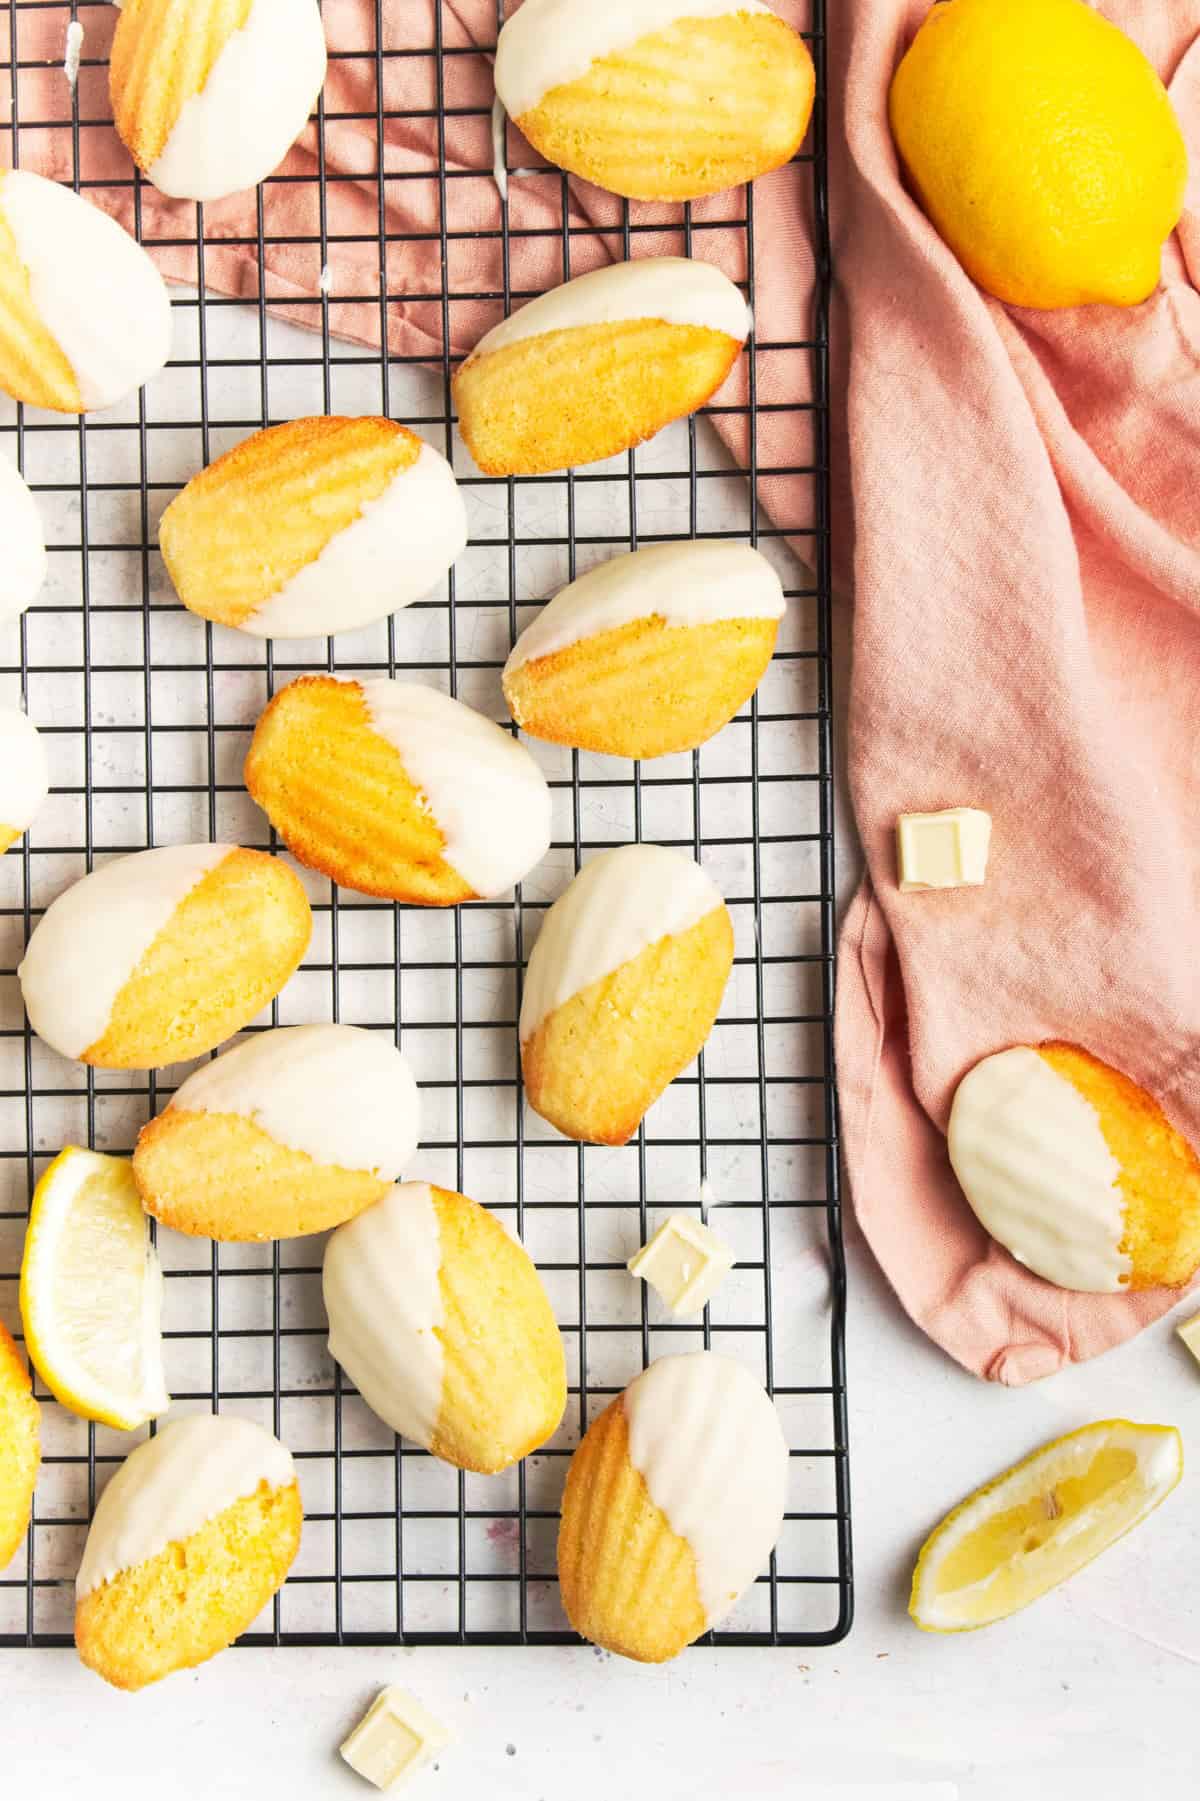 Madeleine cookies on a wire rack with a pink napkin.